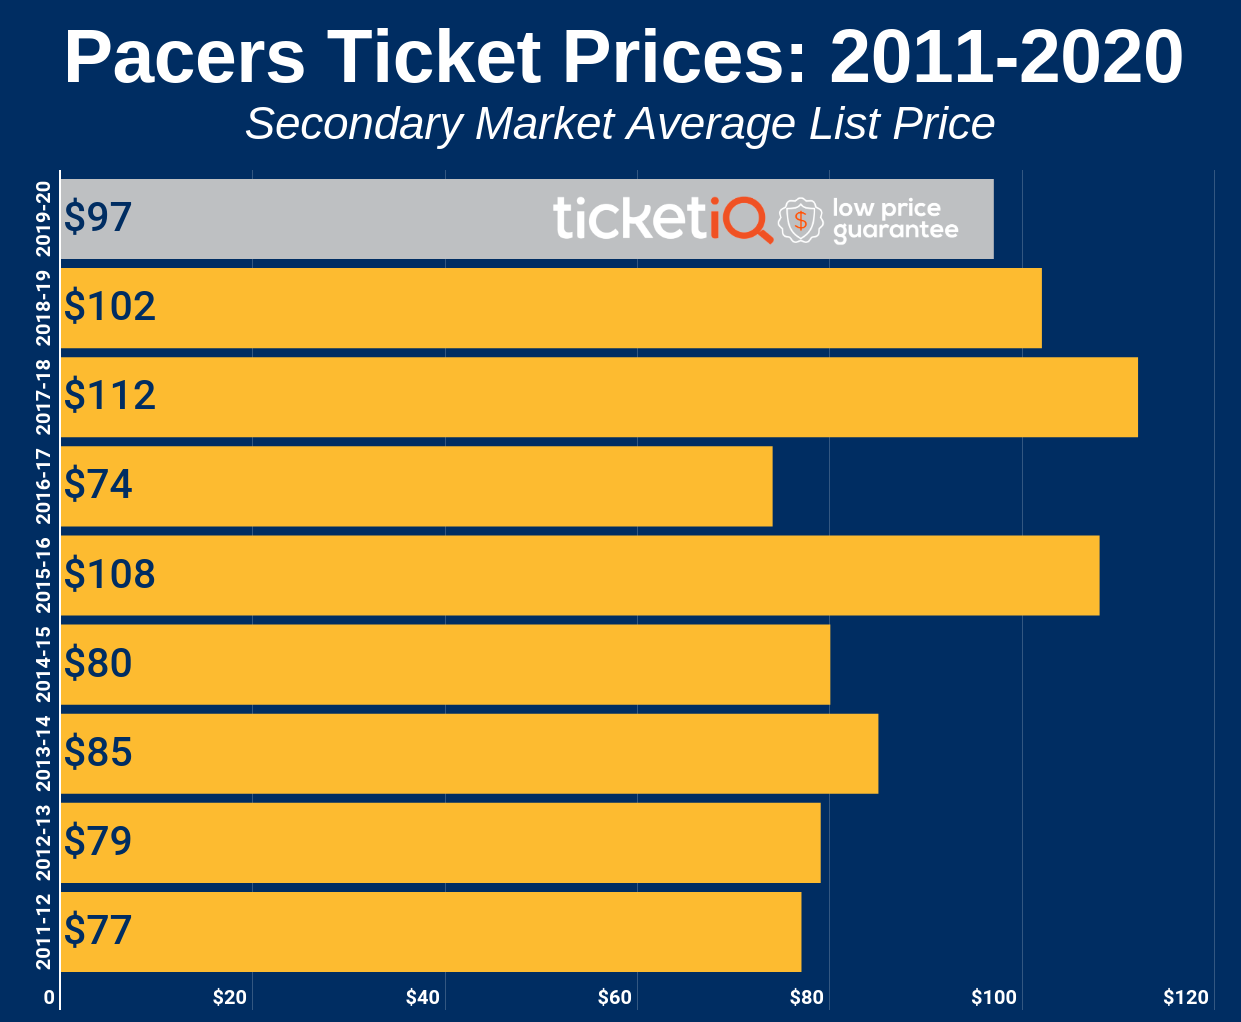 Indiana Pacers Arena Seating Chart